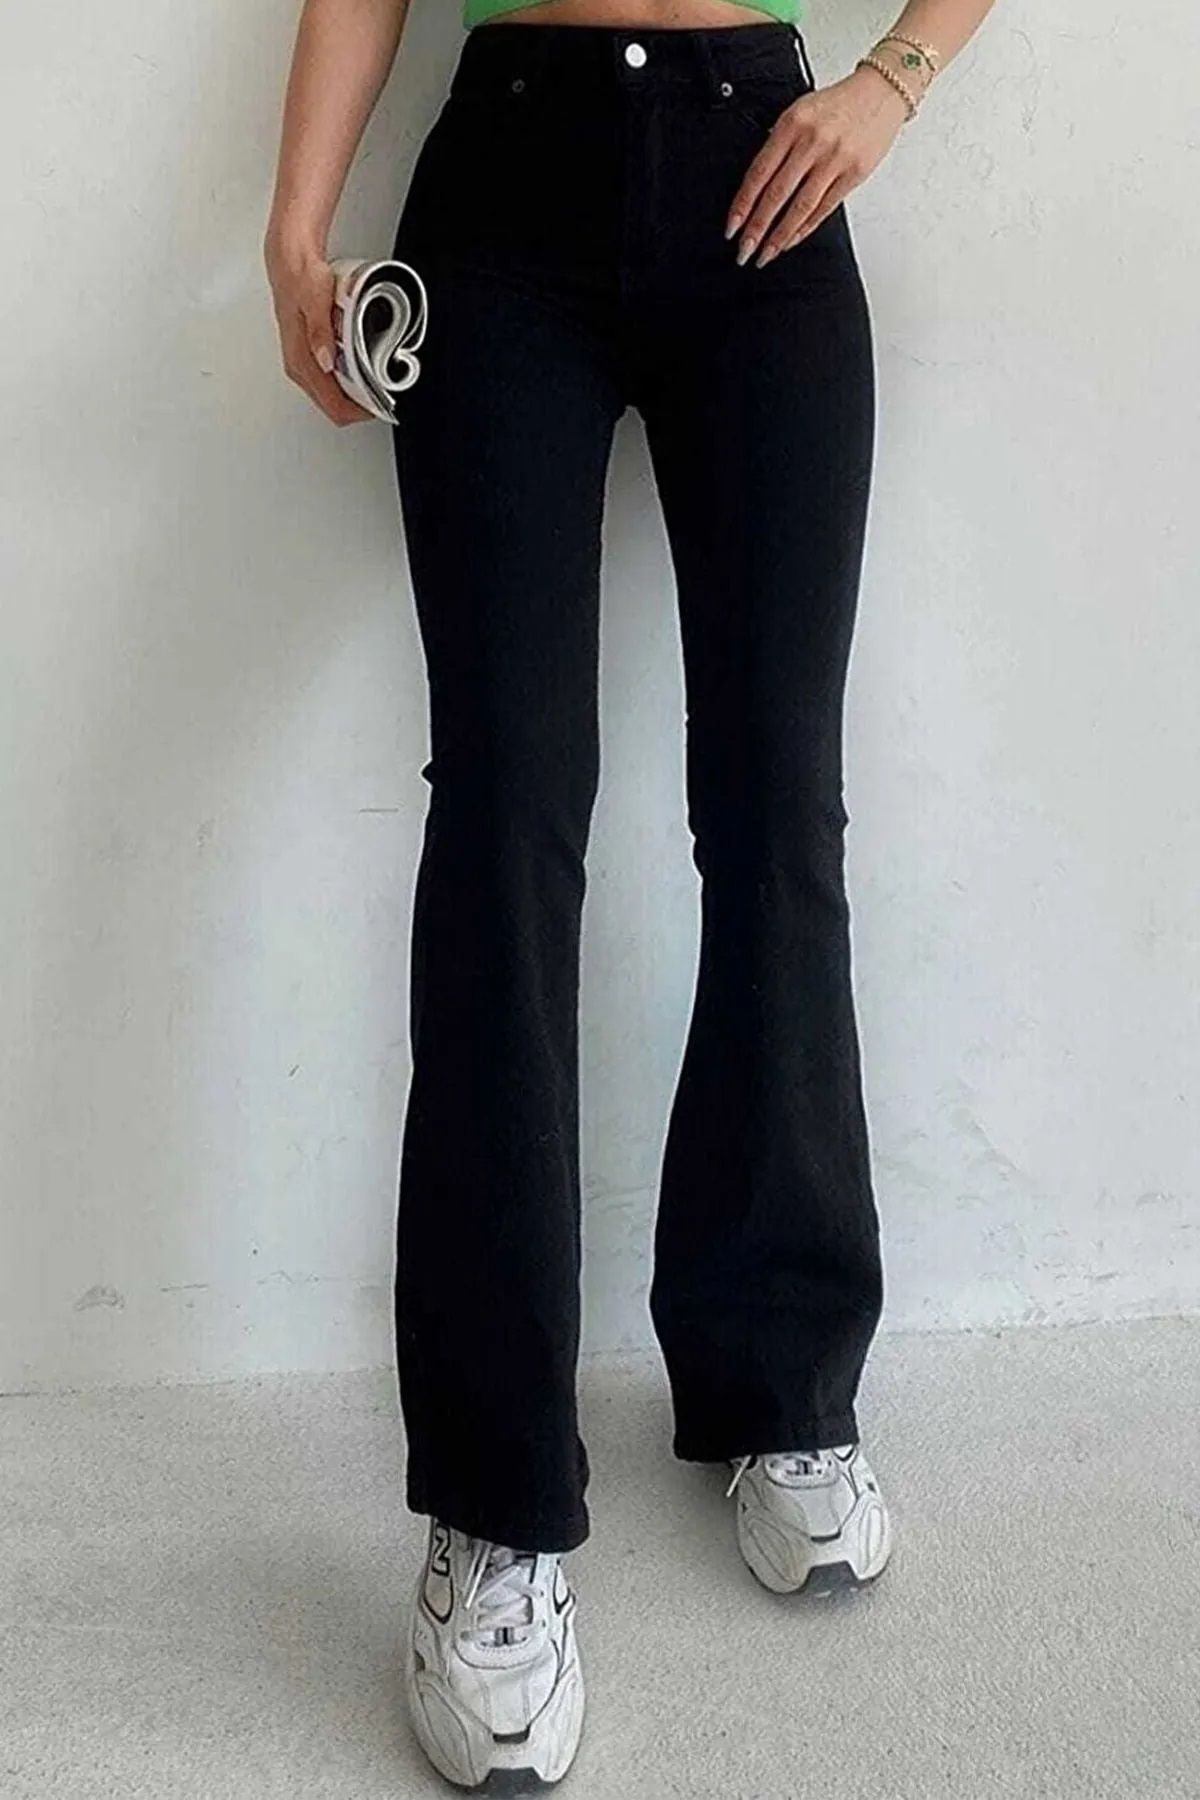 Extra Wide Flares, Flow Pants, Hippy Emo Punk 90s Trousers, Psy Trance  Clothing | eBay